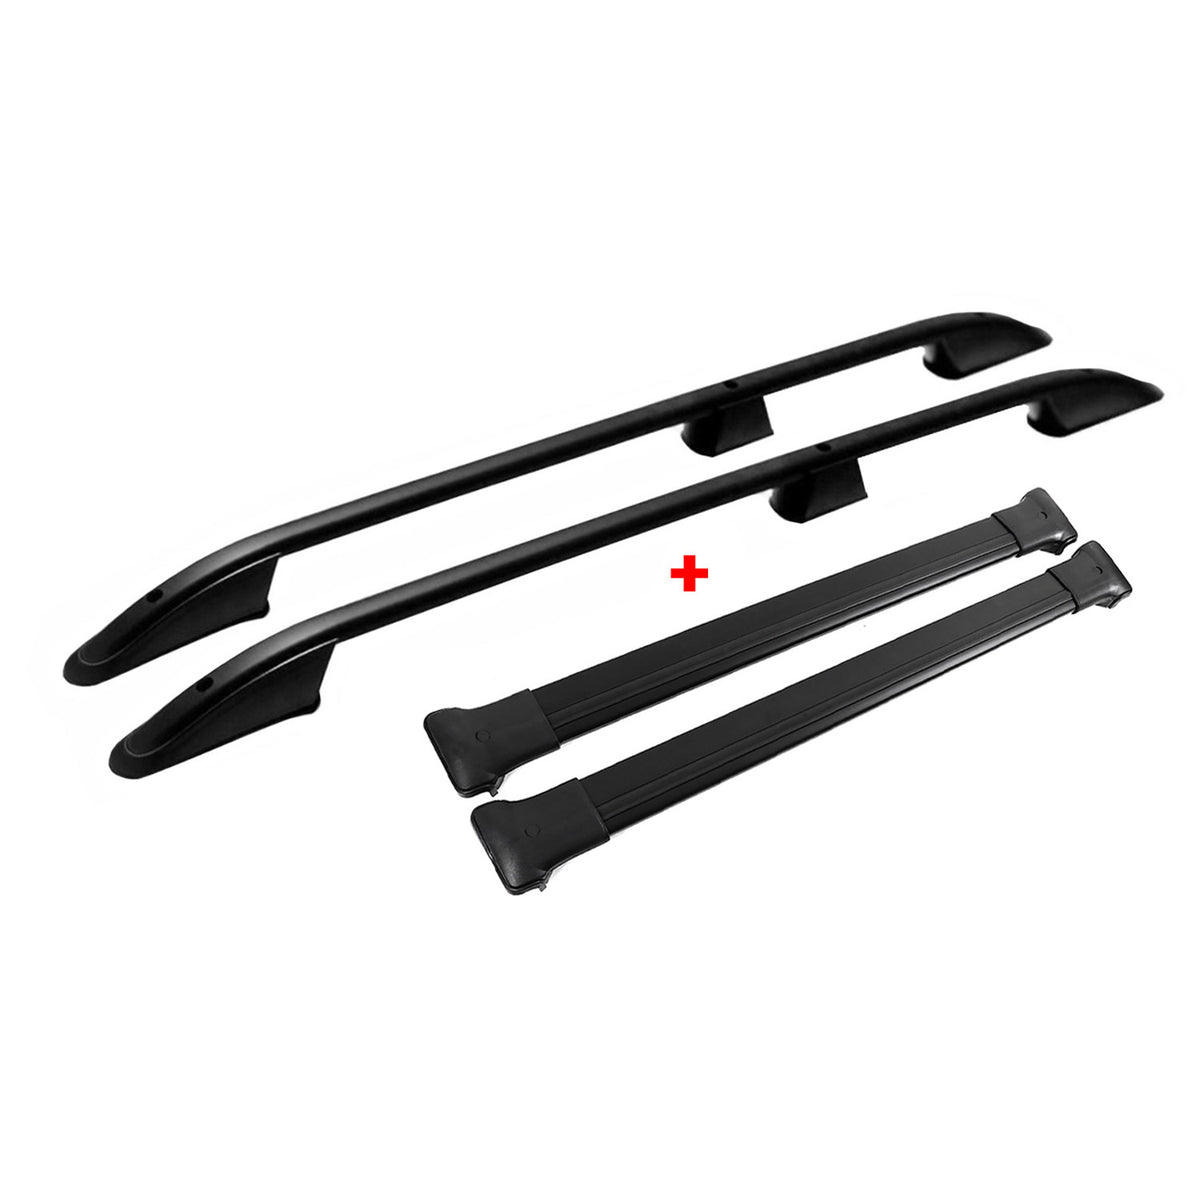 Roof rails + roof rack for Ford Connect 2002-2014 Short Aluminum Black 4x